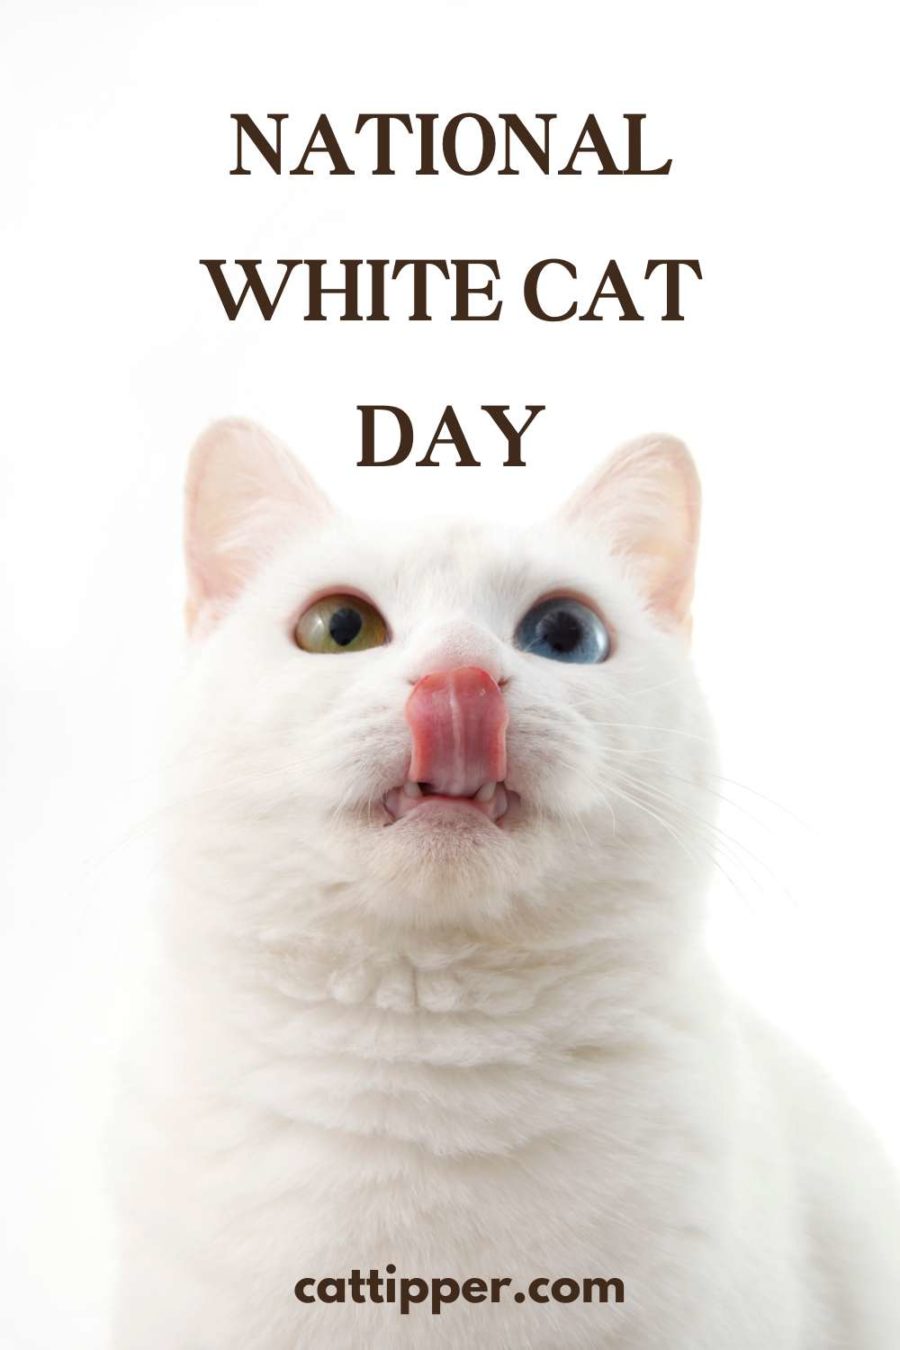 National White Cat Day - image of white cat